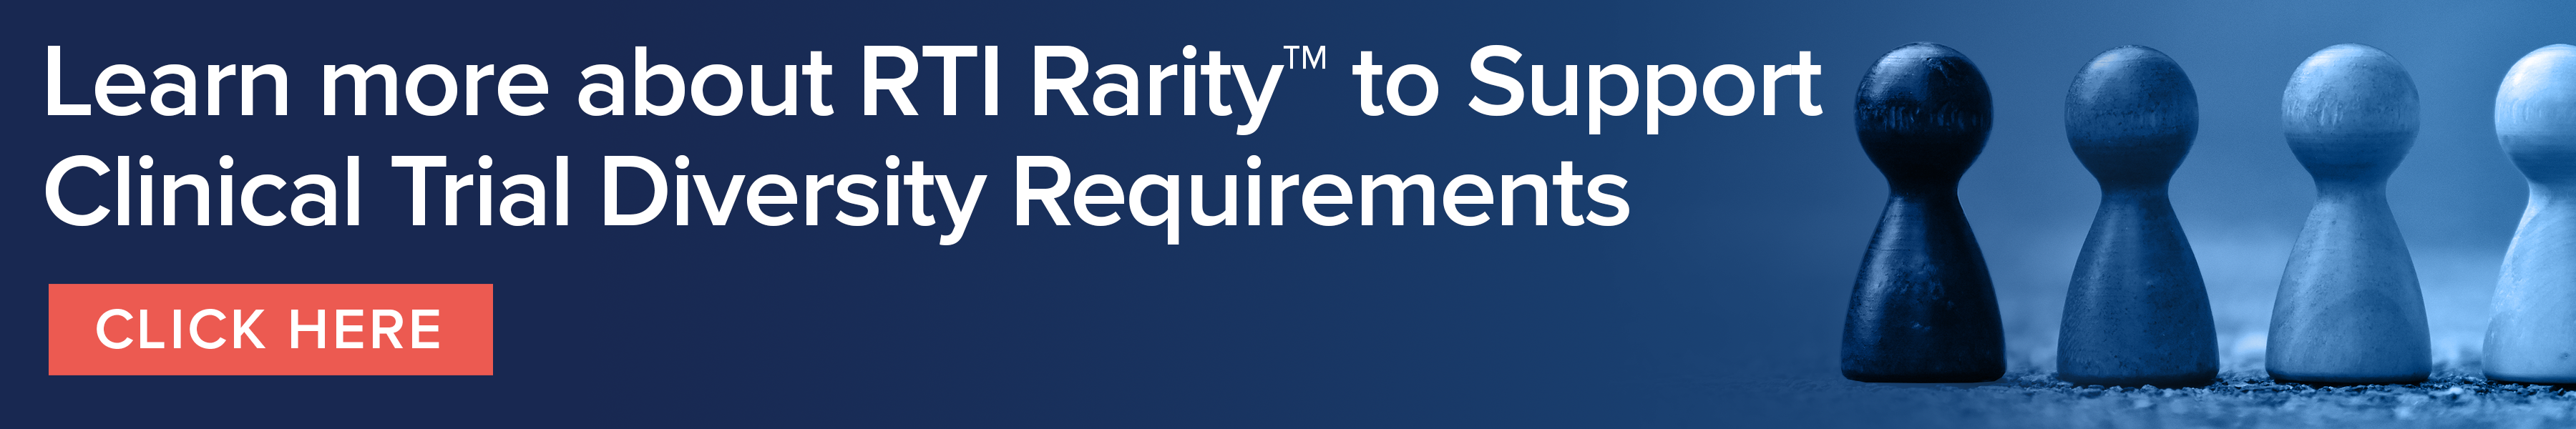 Learn more about RTI Rarity to Support Clinical Trial Diversity Requirements - Click here